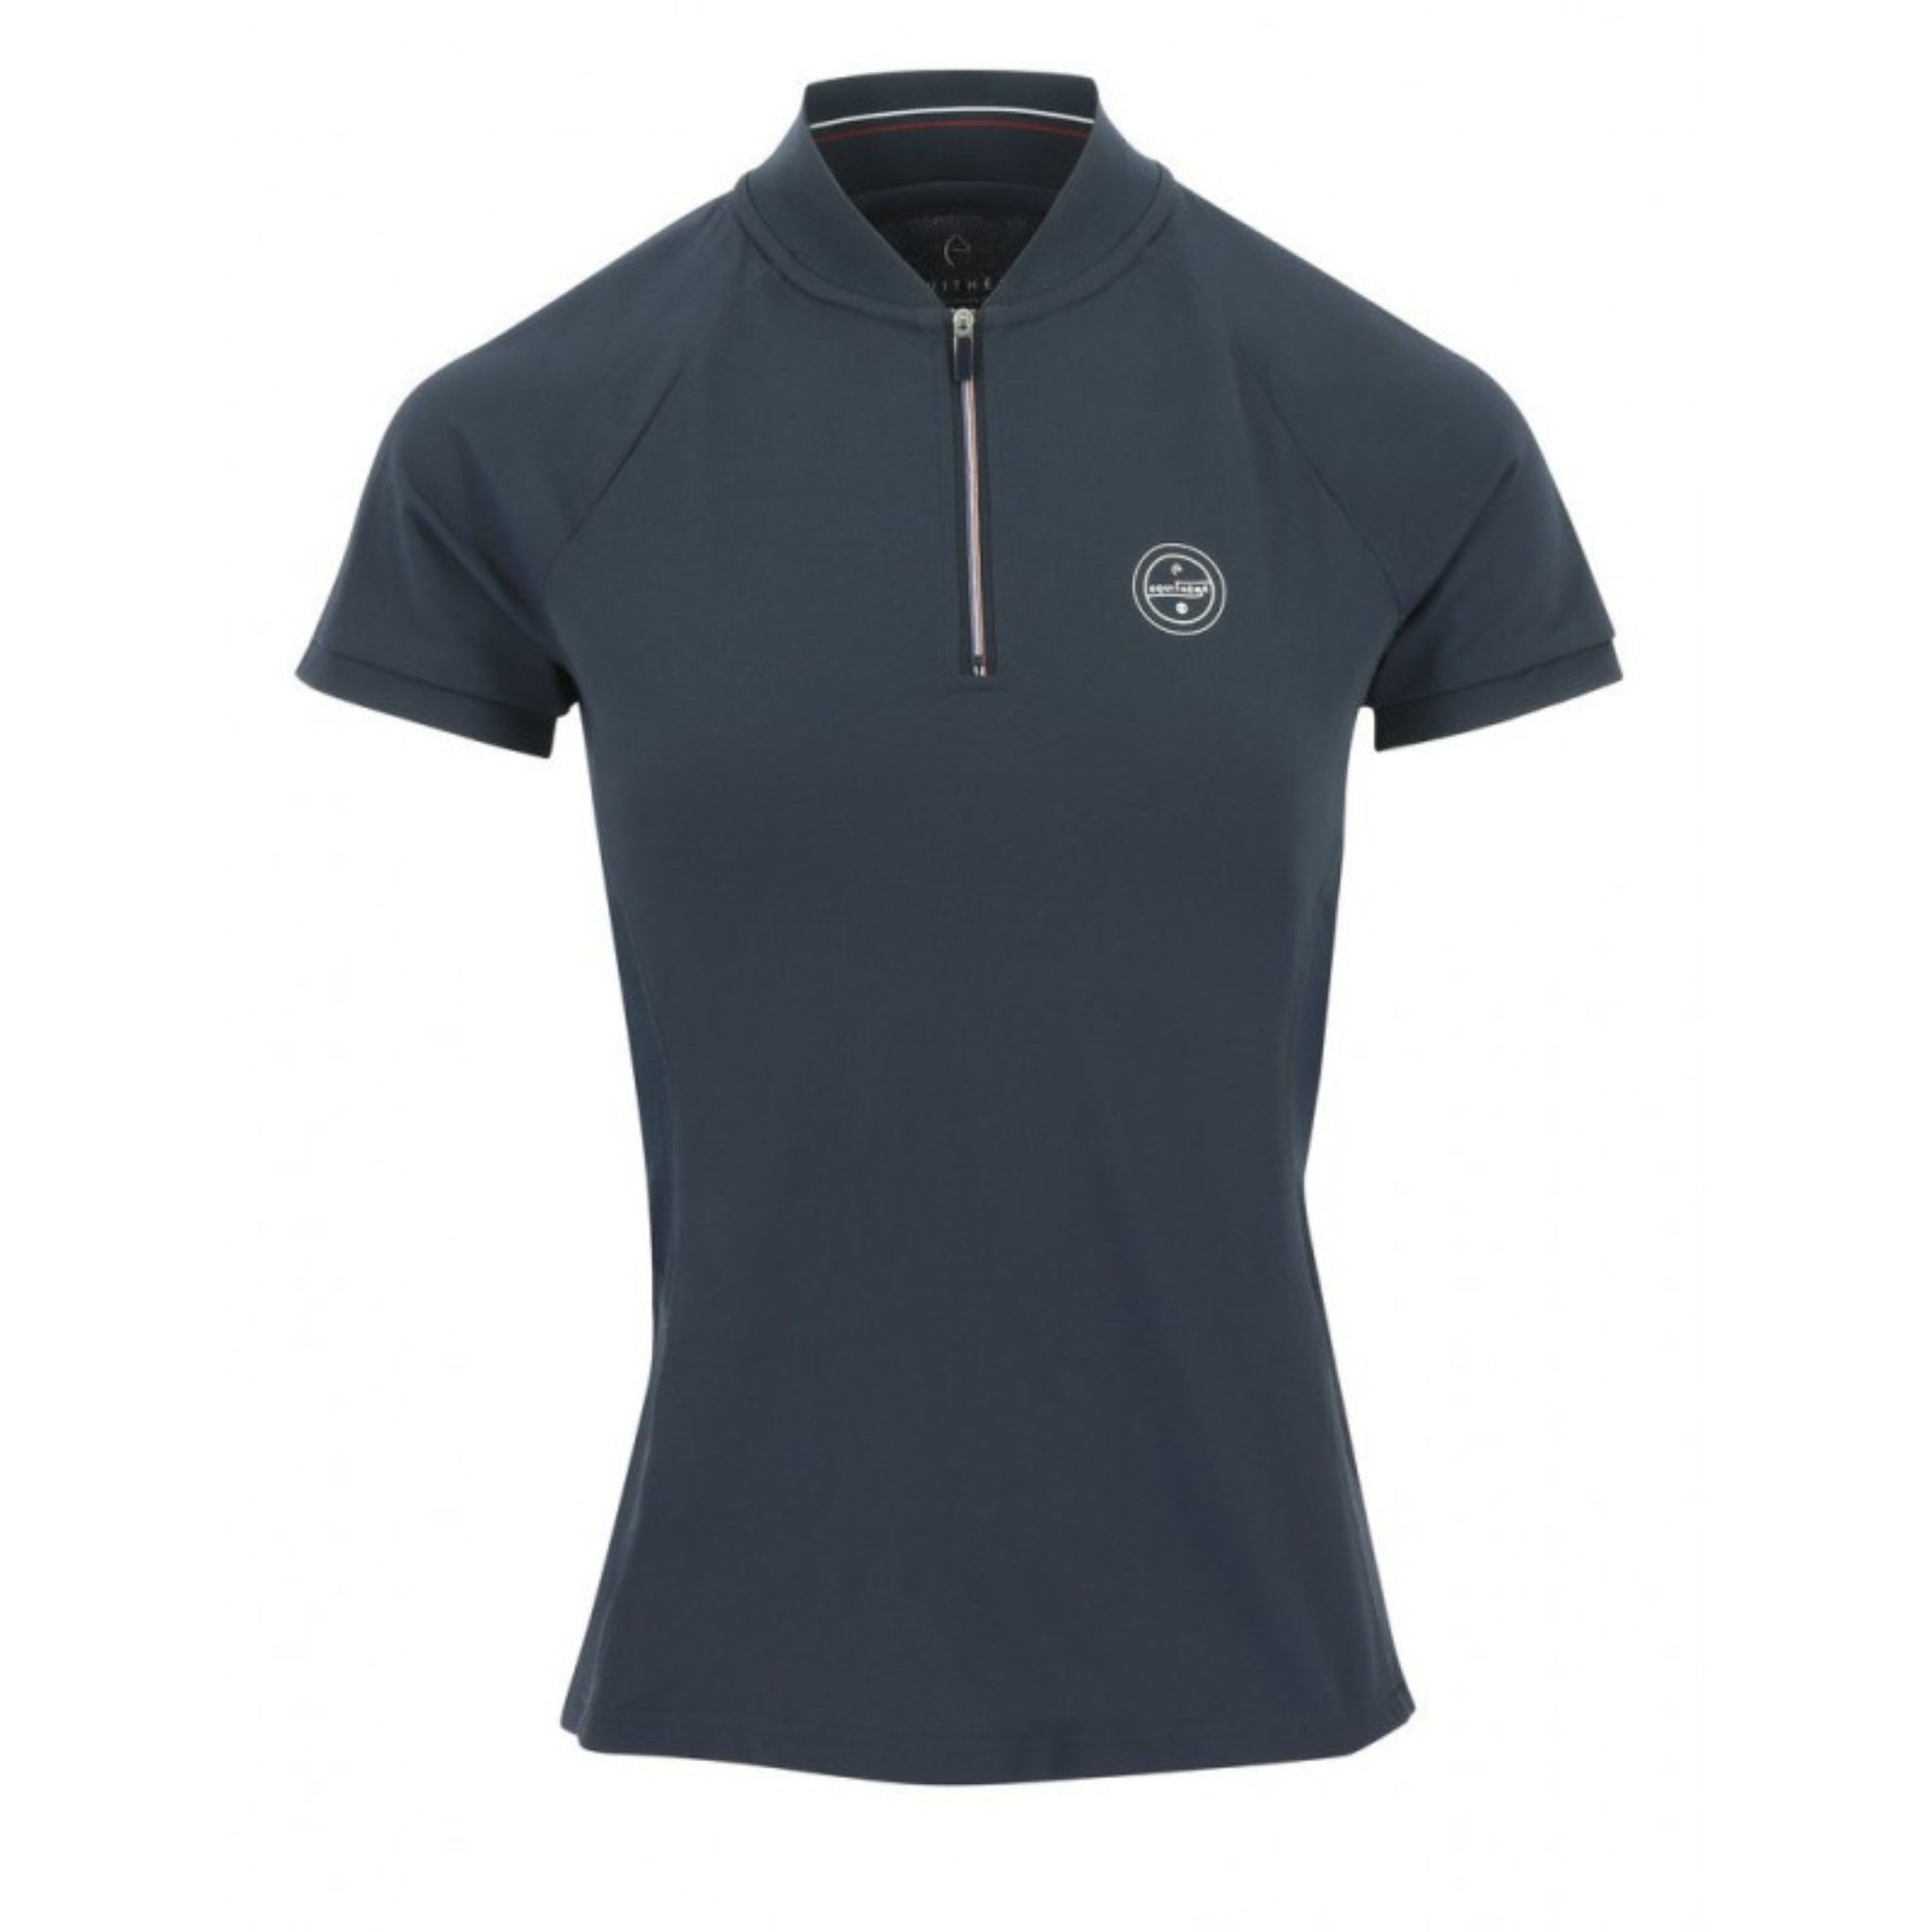 Navy zip polo with Equitheme logo on the left shoulder